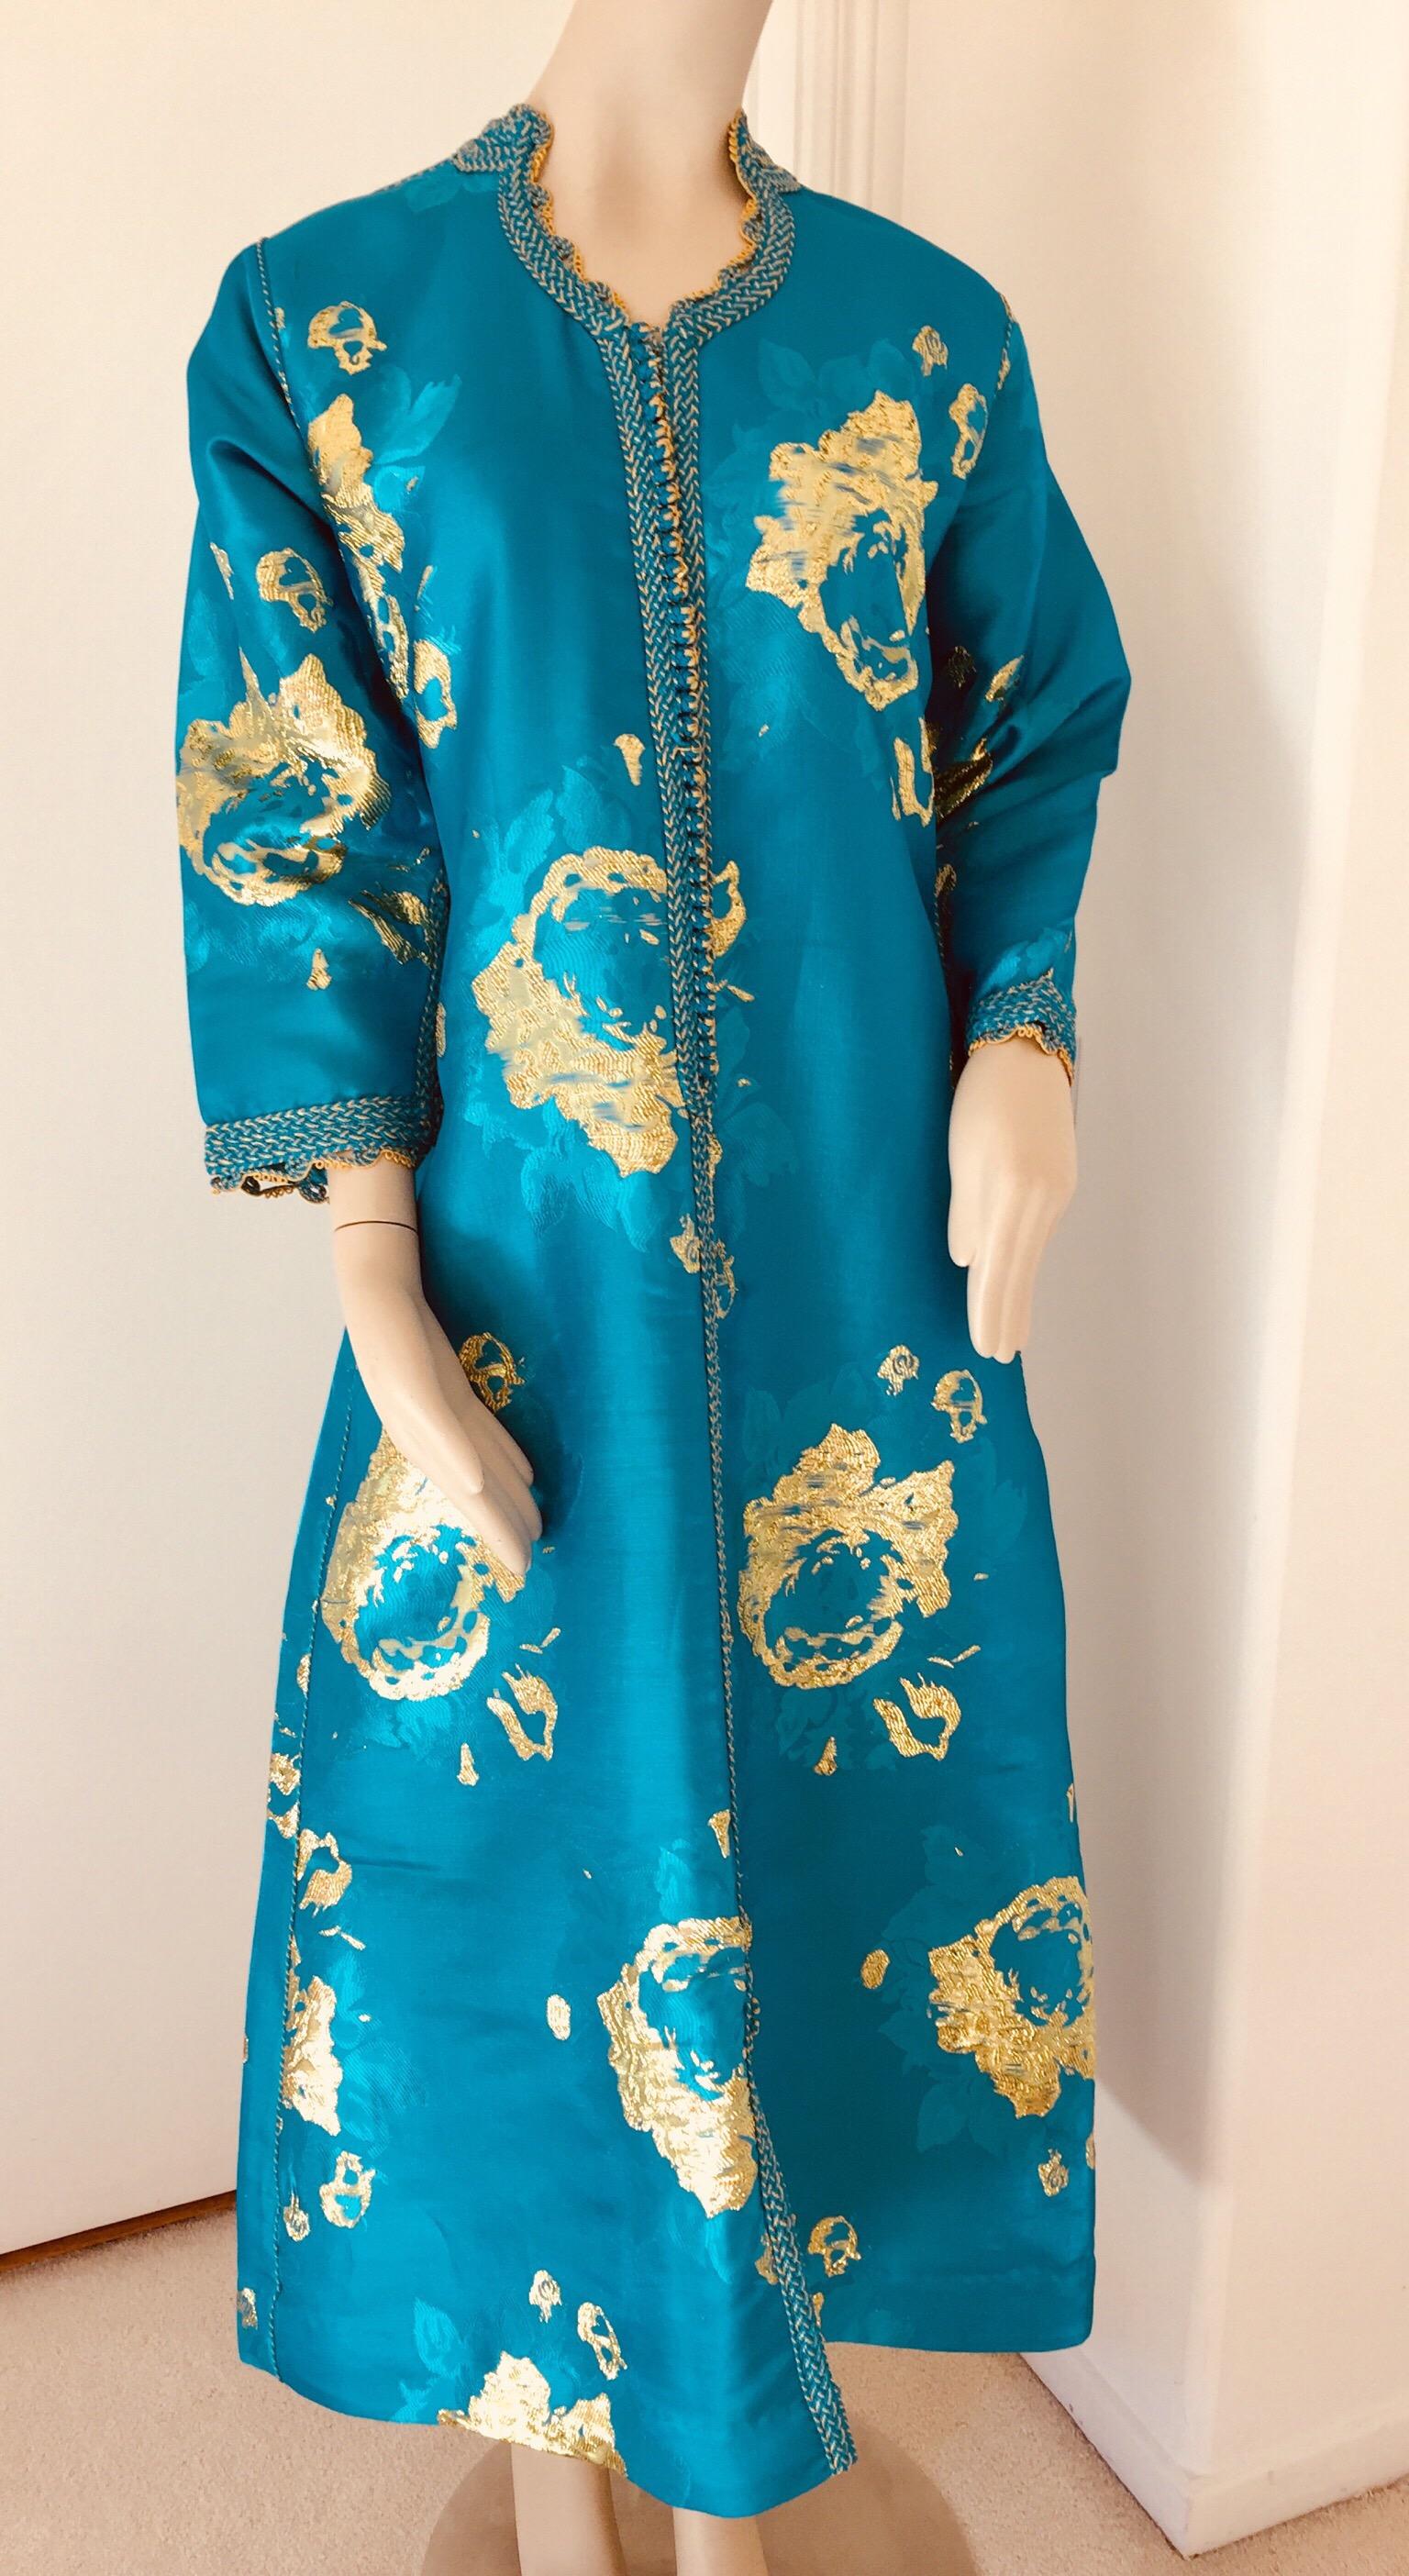 Hand-Crafted Moroccan Vintage Kaftan in Turquoise and Gold Floral Brocade Metallic Lame